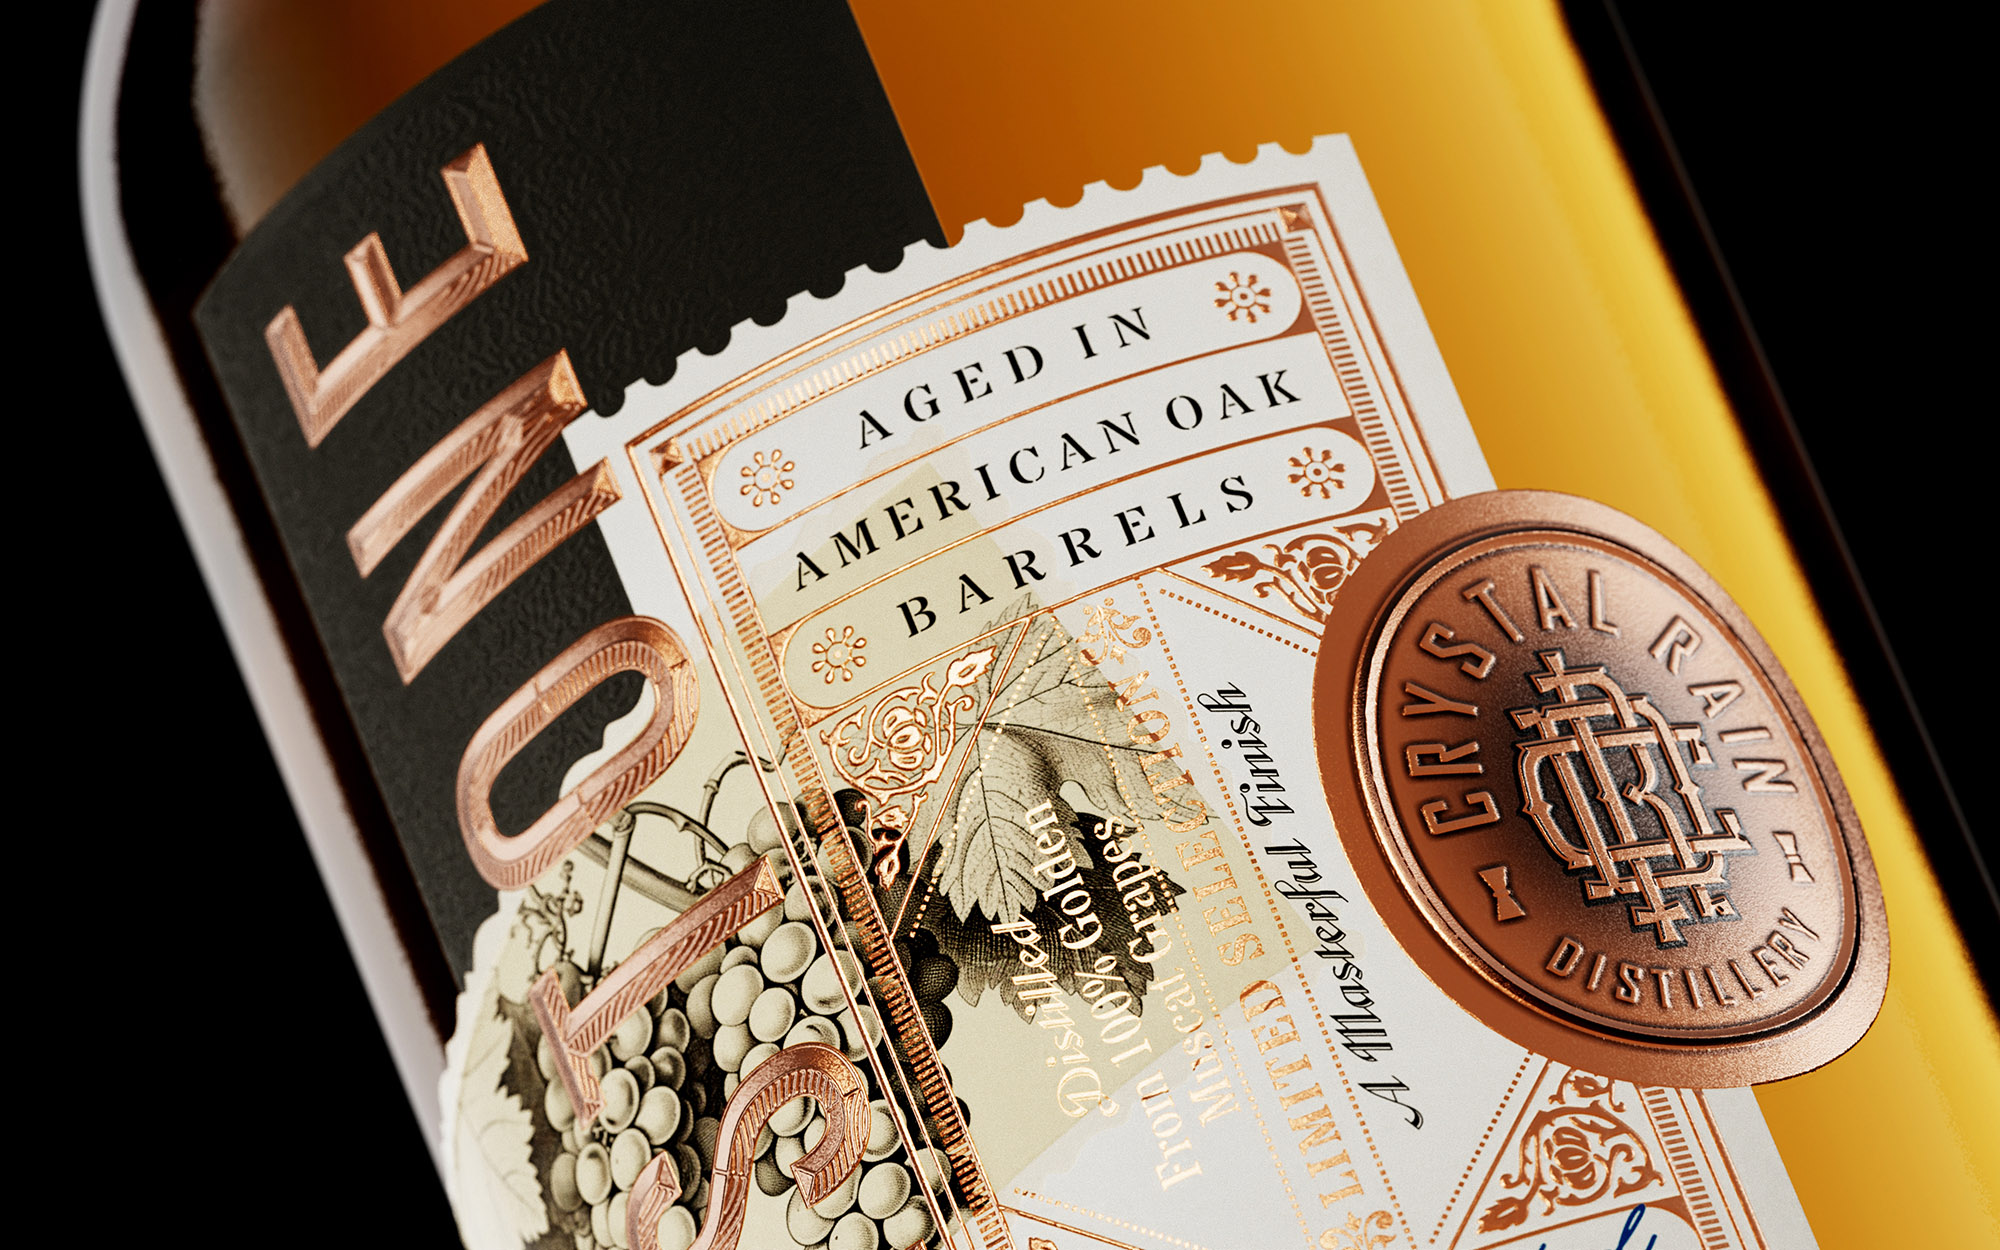 Crafting the Perfect Blend: The Artistry Behind Kristone Craft Grape Brandy Label Design